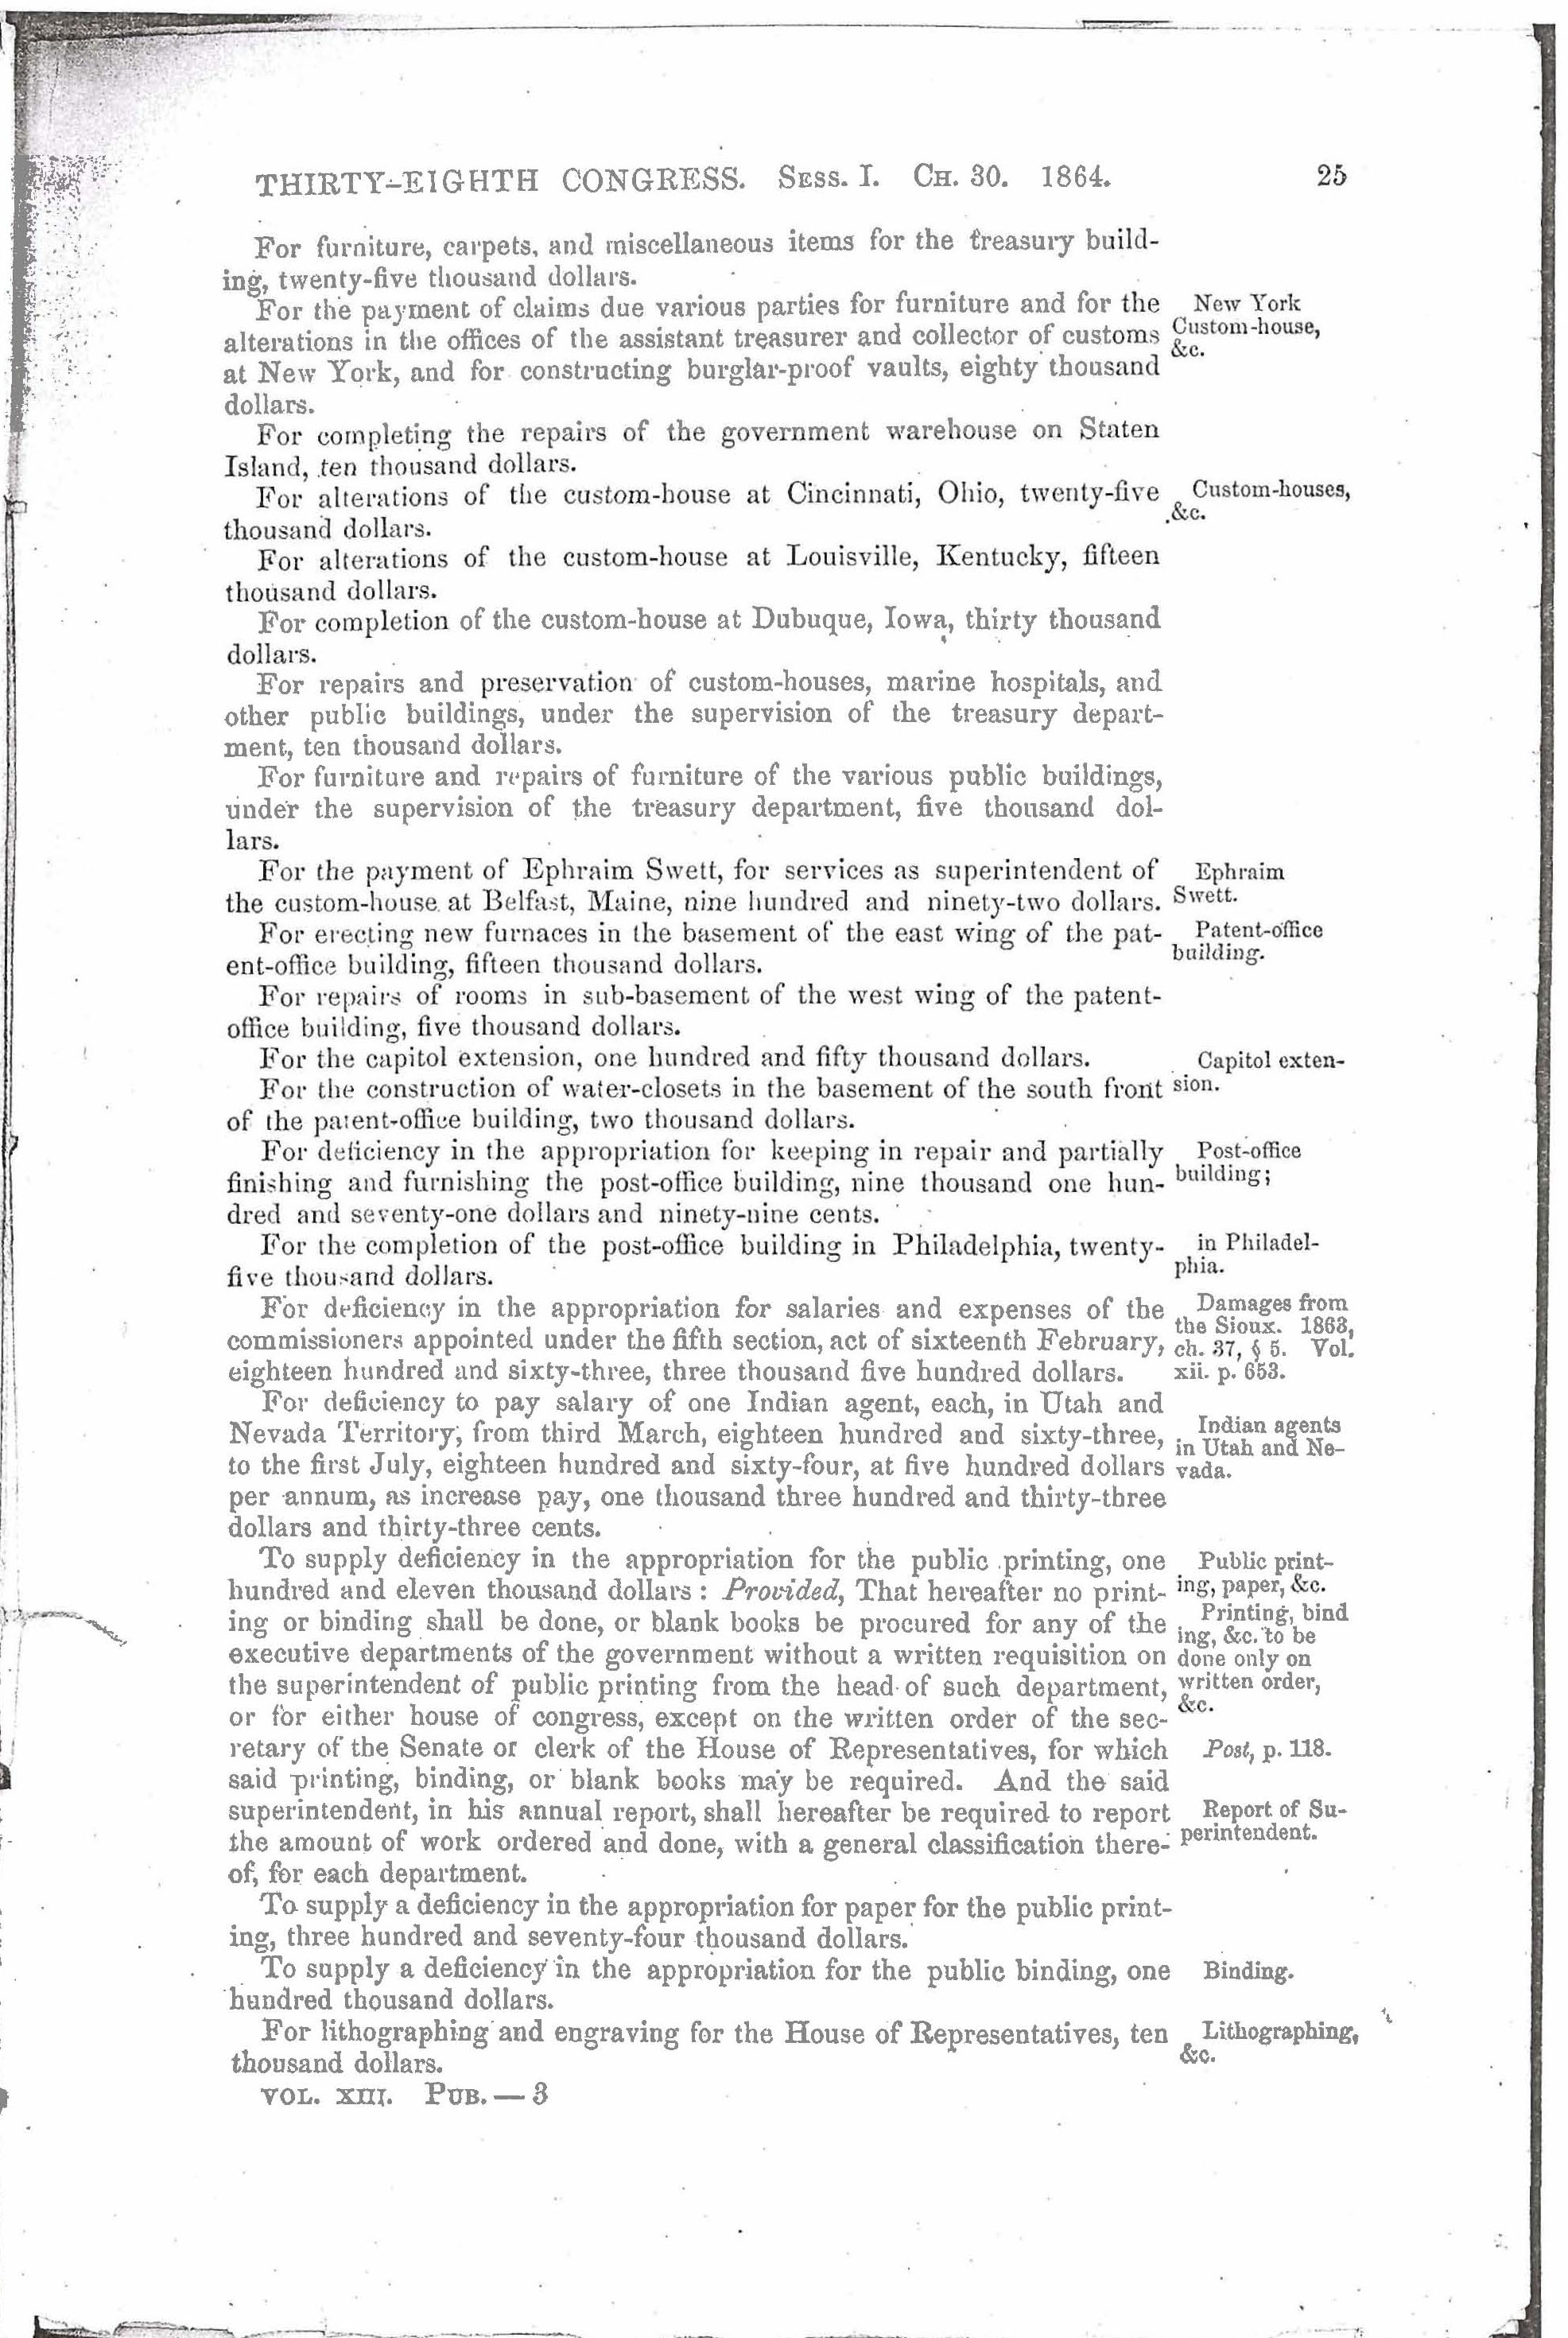 Act of Congress Authorizing Construction of the Washington Naval Hospital, Page 4 of 7